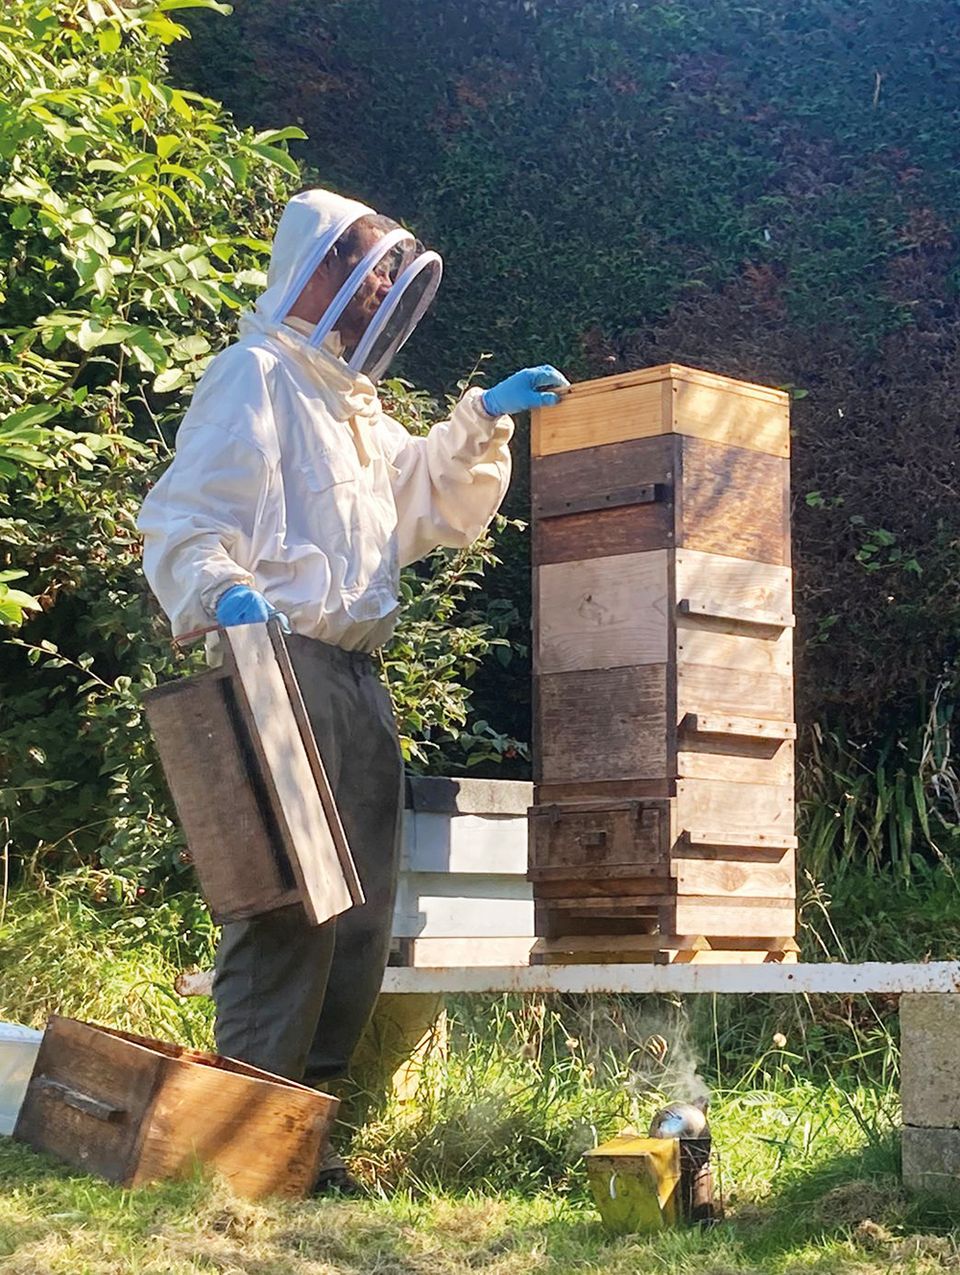 a man wearing a beekeeper 's suit is working on a beehive